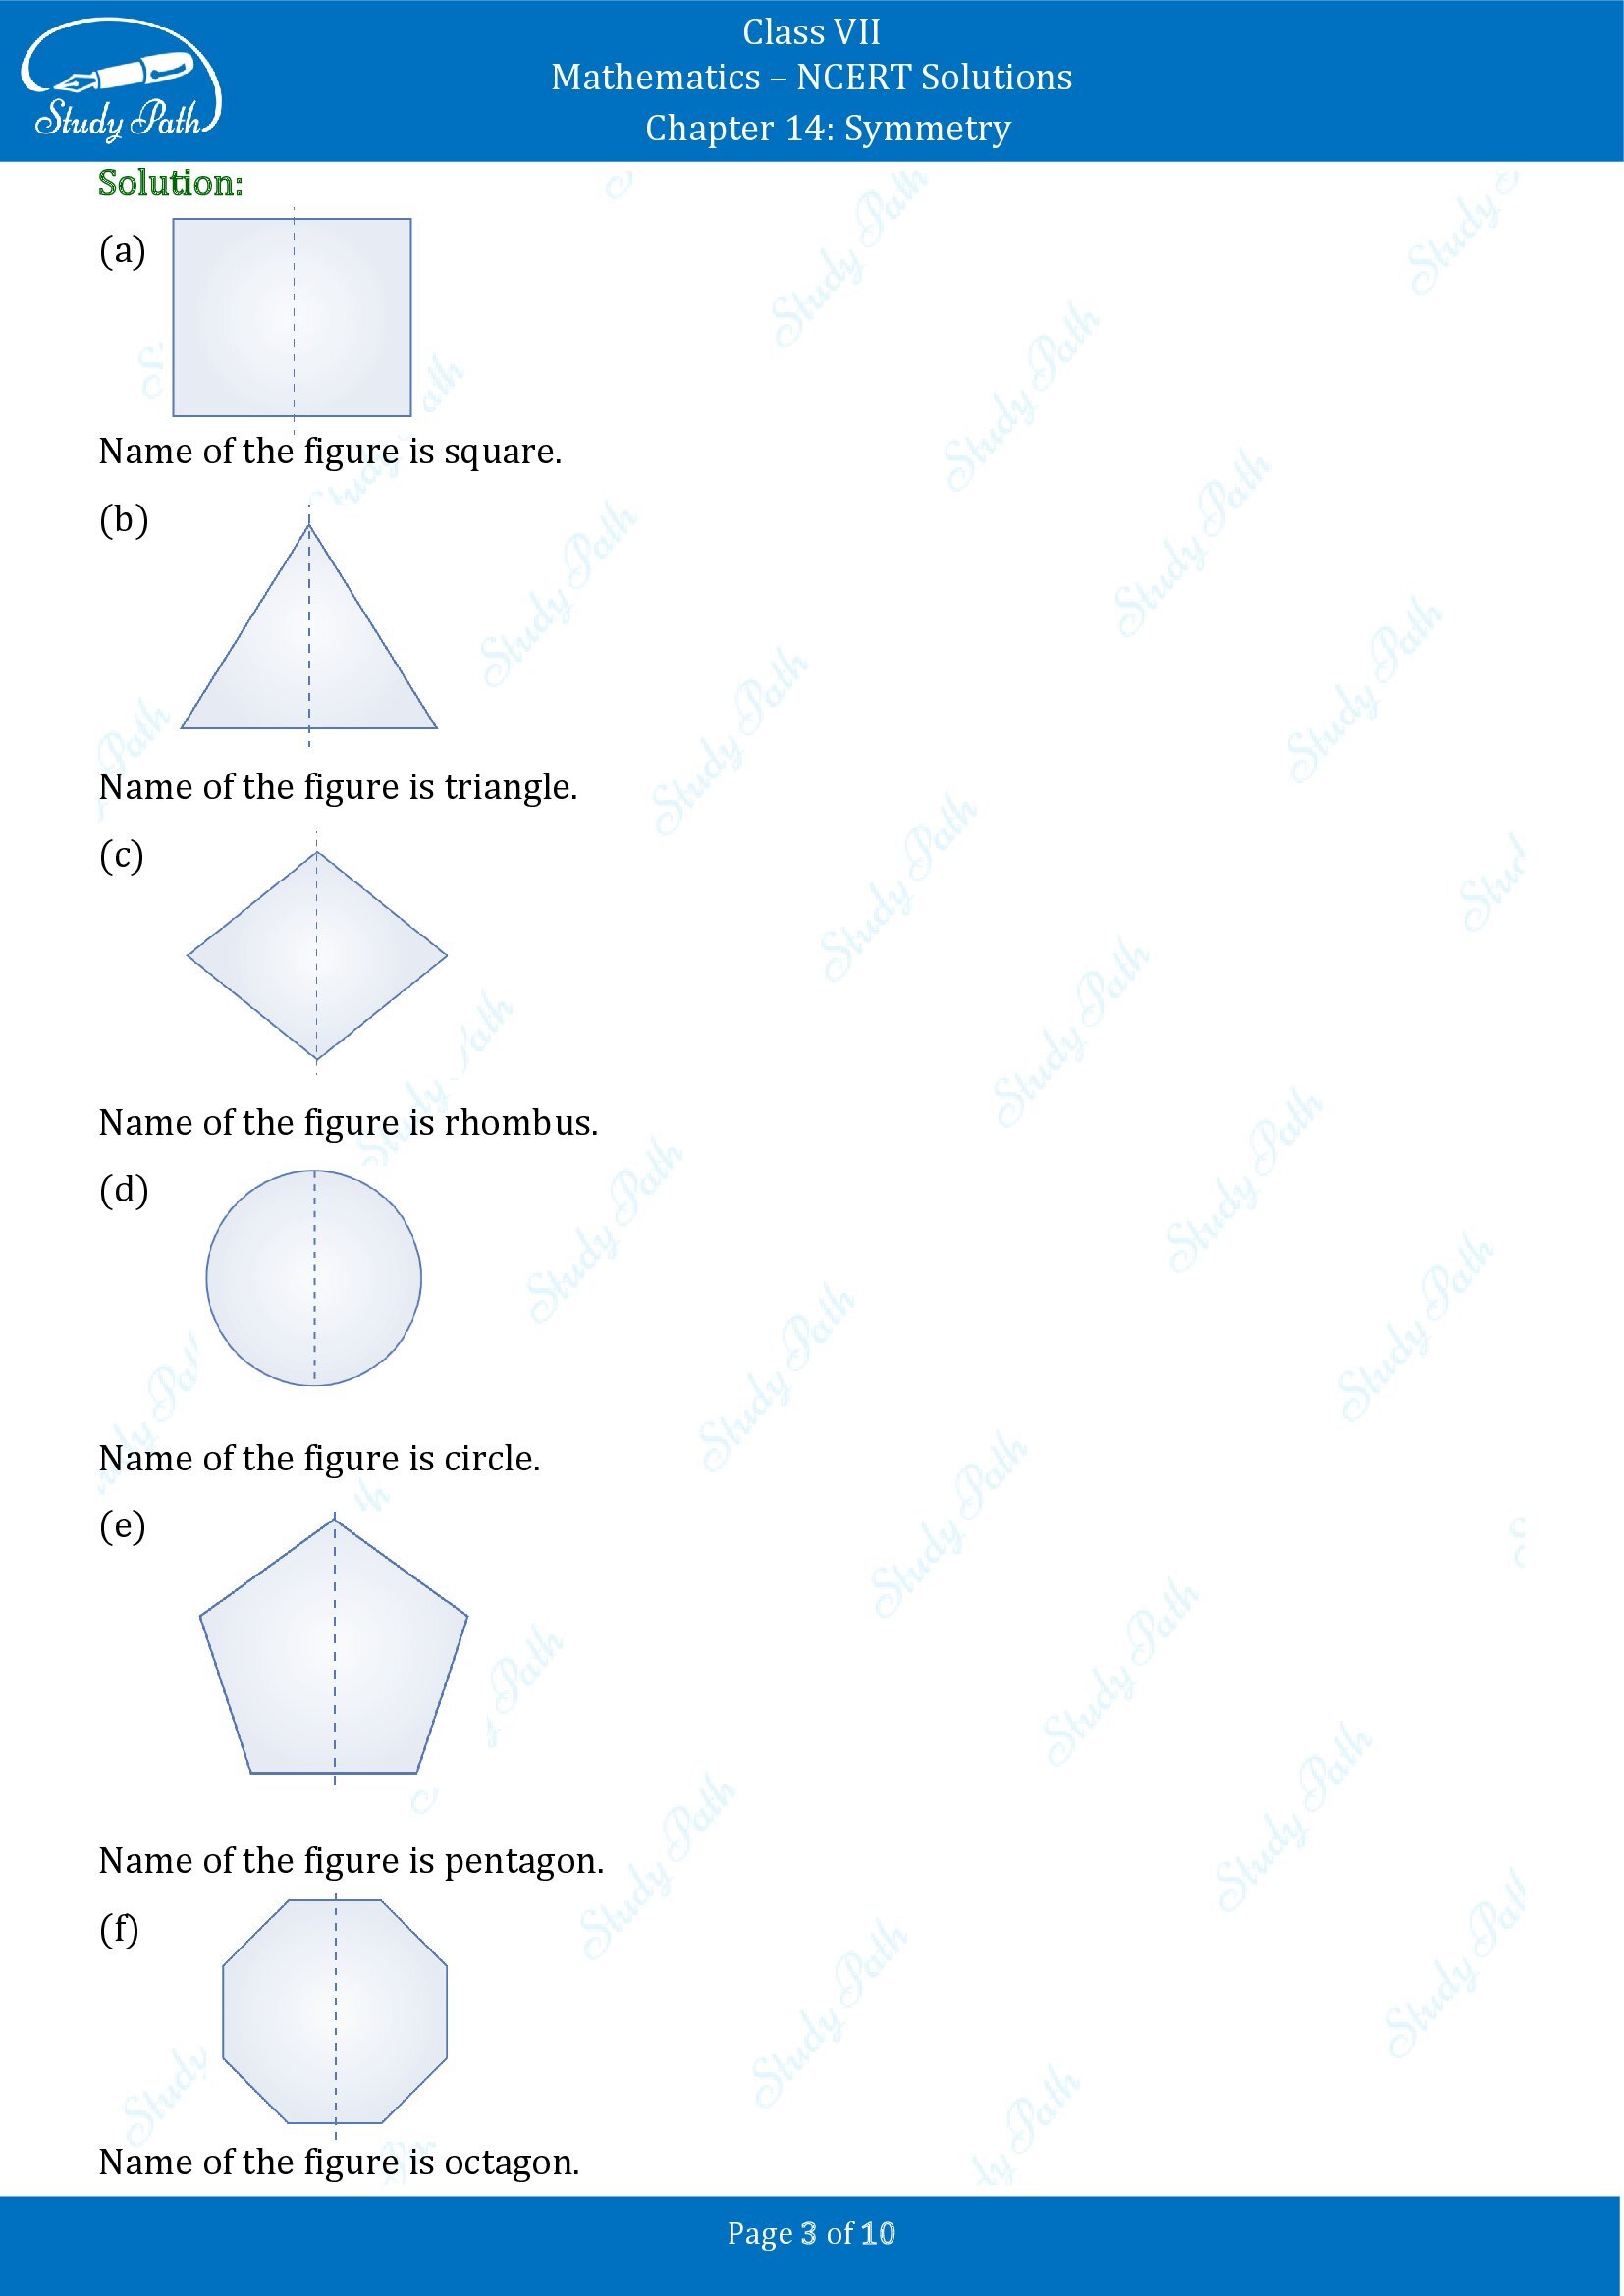 NCERT Solutions for Class 7 Maths Chapter 14 Symmetry Exercise 14.1 00003